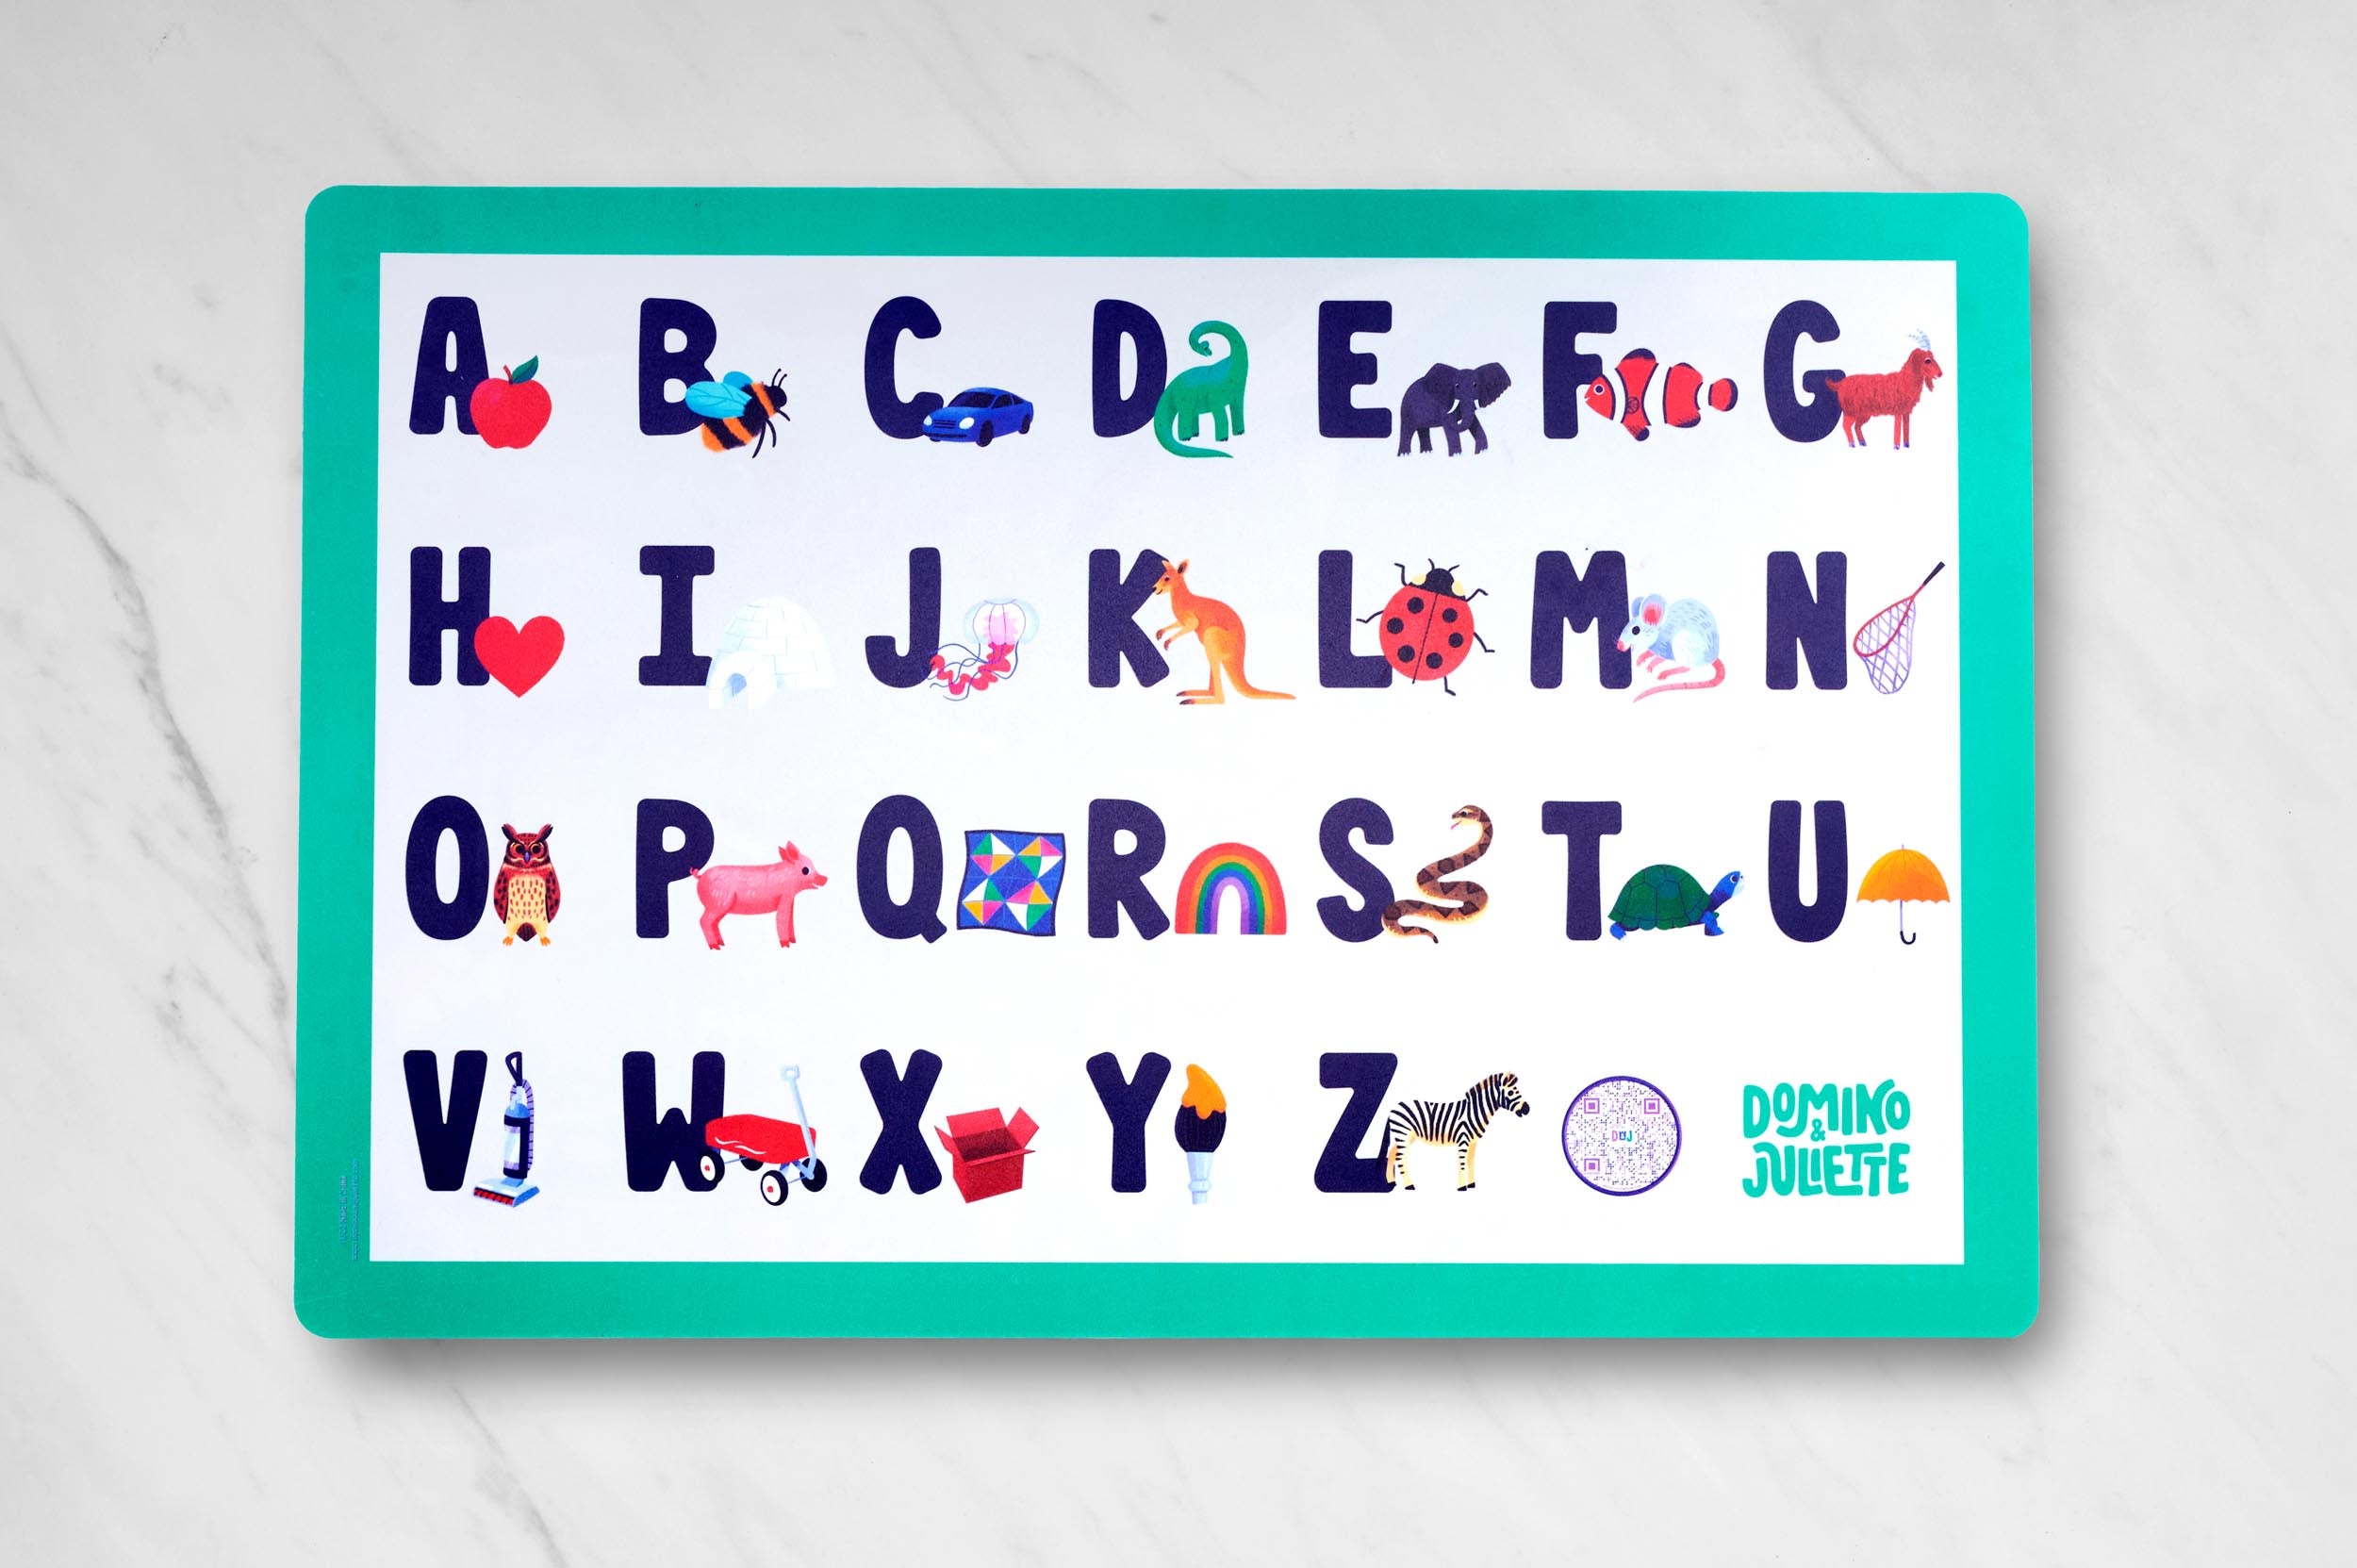 Alphabet Placemat for Kids, Alphabet Placemat, Alphabet Placemats, ABC Placemat, ABC Placemats, Placemat featuring simple phonics illustrations, engaging placemat for two year olds, placemats for children, kids playing with placemat.